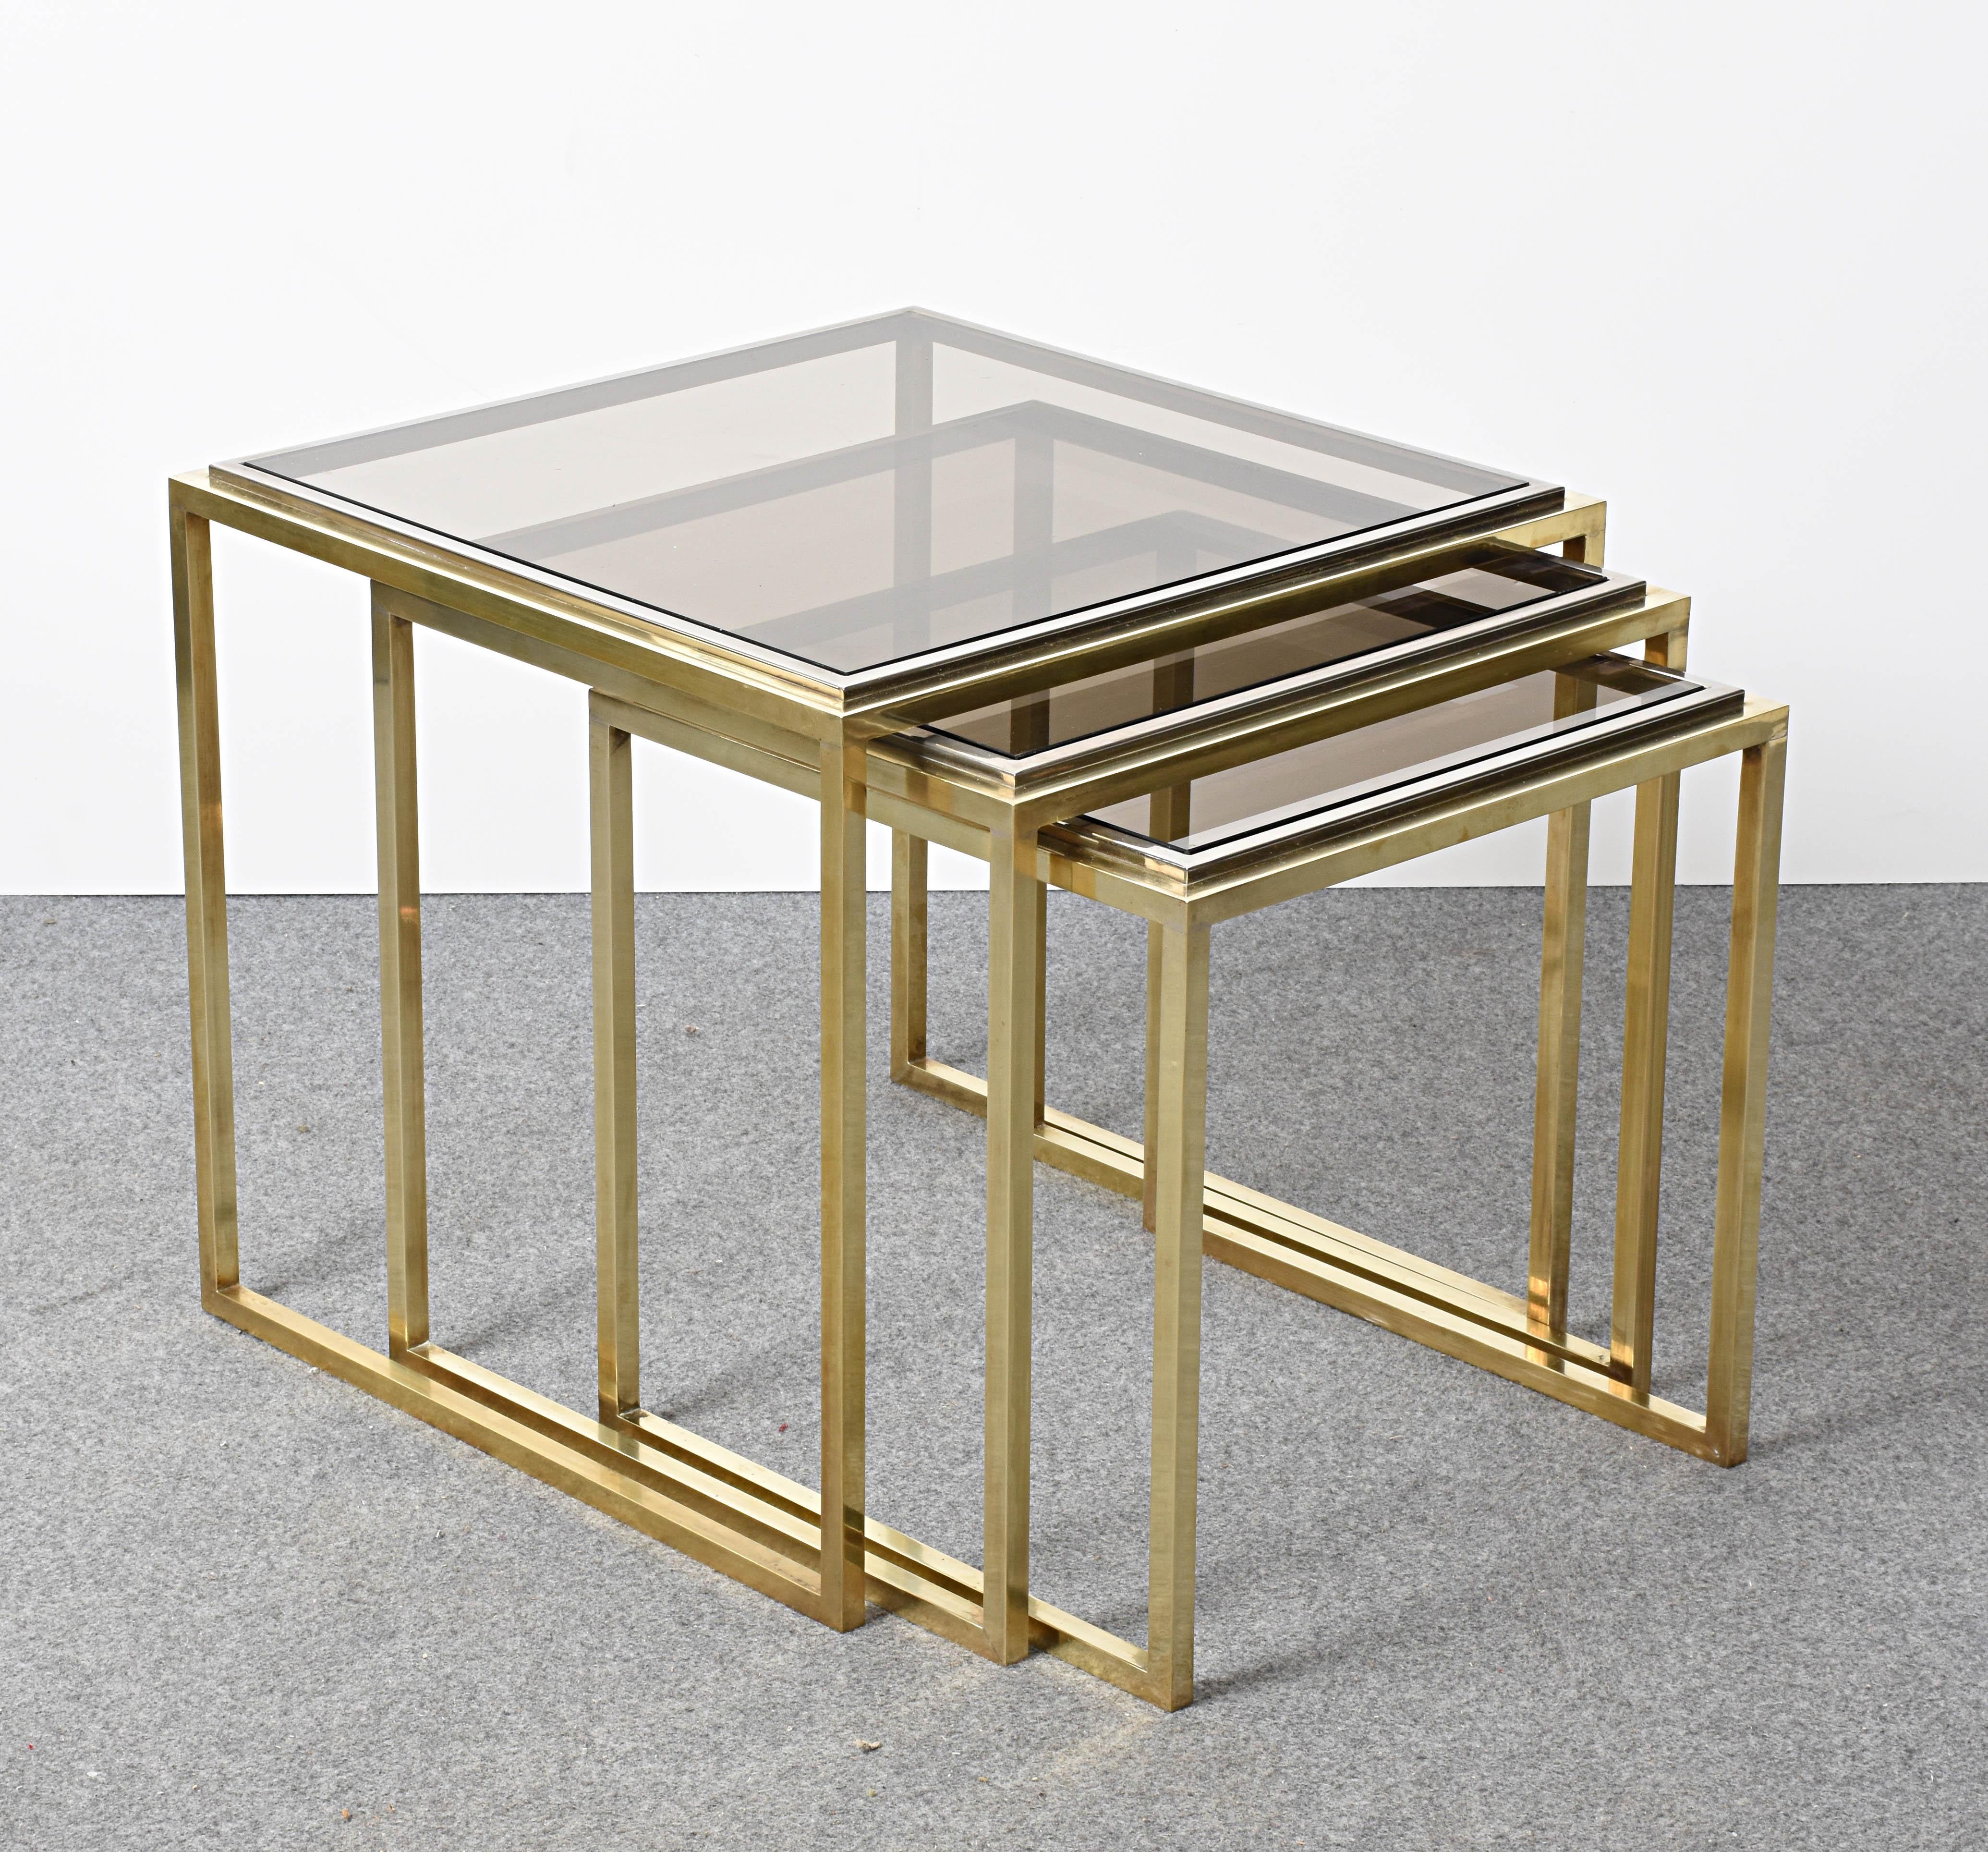 A wonderful set of three Nesting tables in chrome metal, brass and smoked glass.

It has all the Classic elements of Mid-Century Modern Italian production form the 1970s: clear lines, perfect material pairing and a perfect balance of elegance and